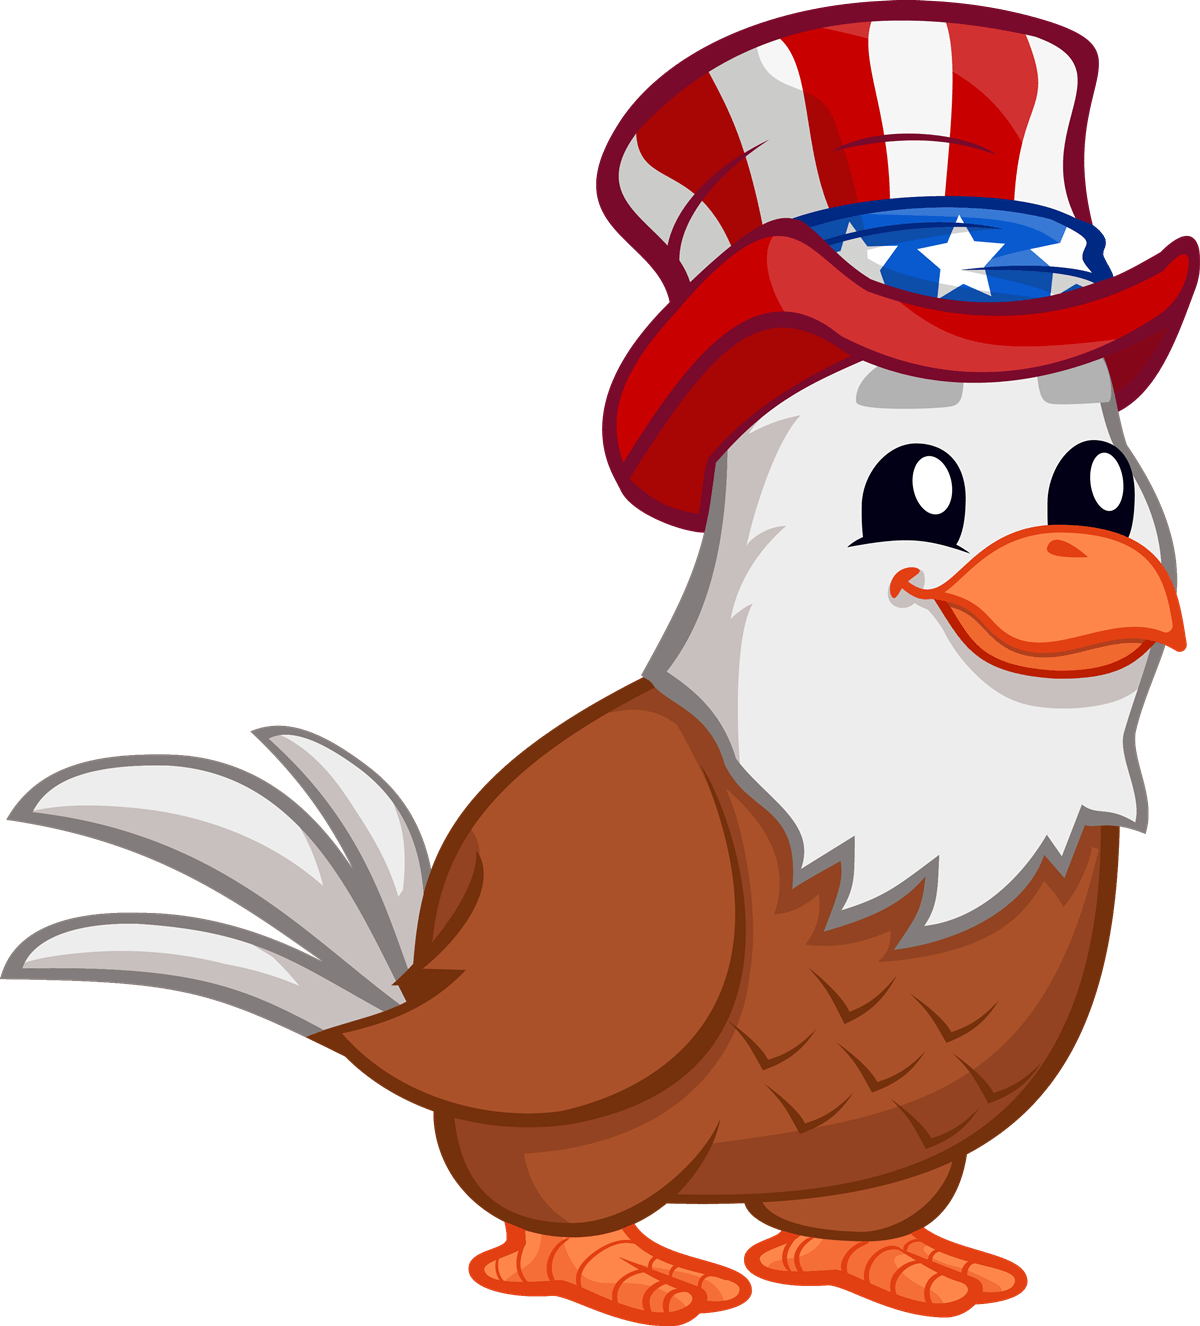 Eagle clipart cartoon. Images for pc wallpapers